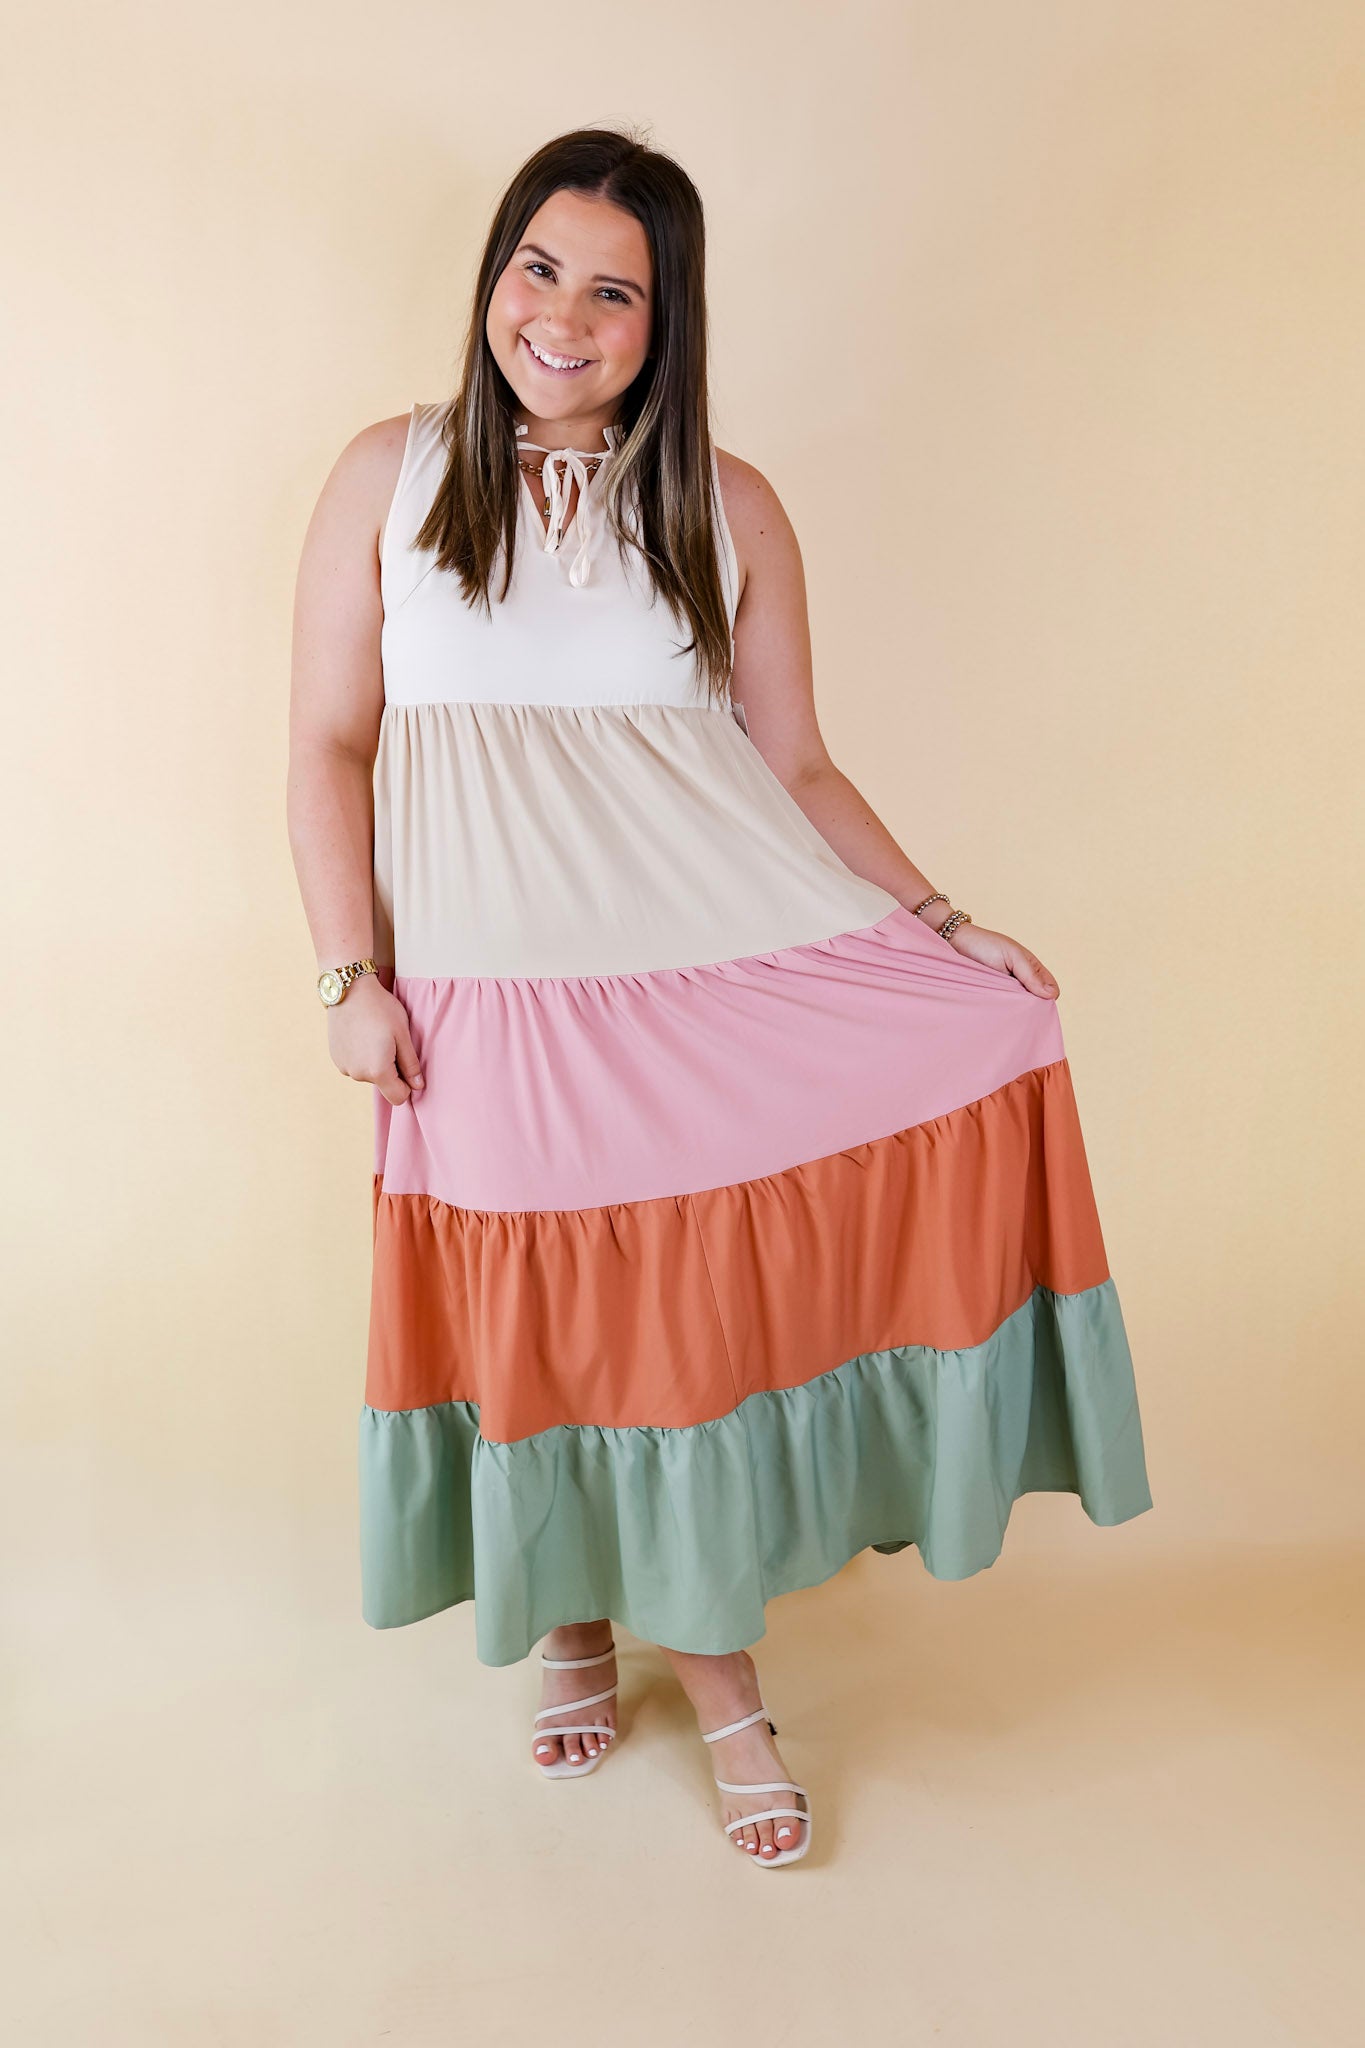 Calm Waters High Neck Tiered Maxi Dress in Cream Mix - Giddy Up Glamour Boutique